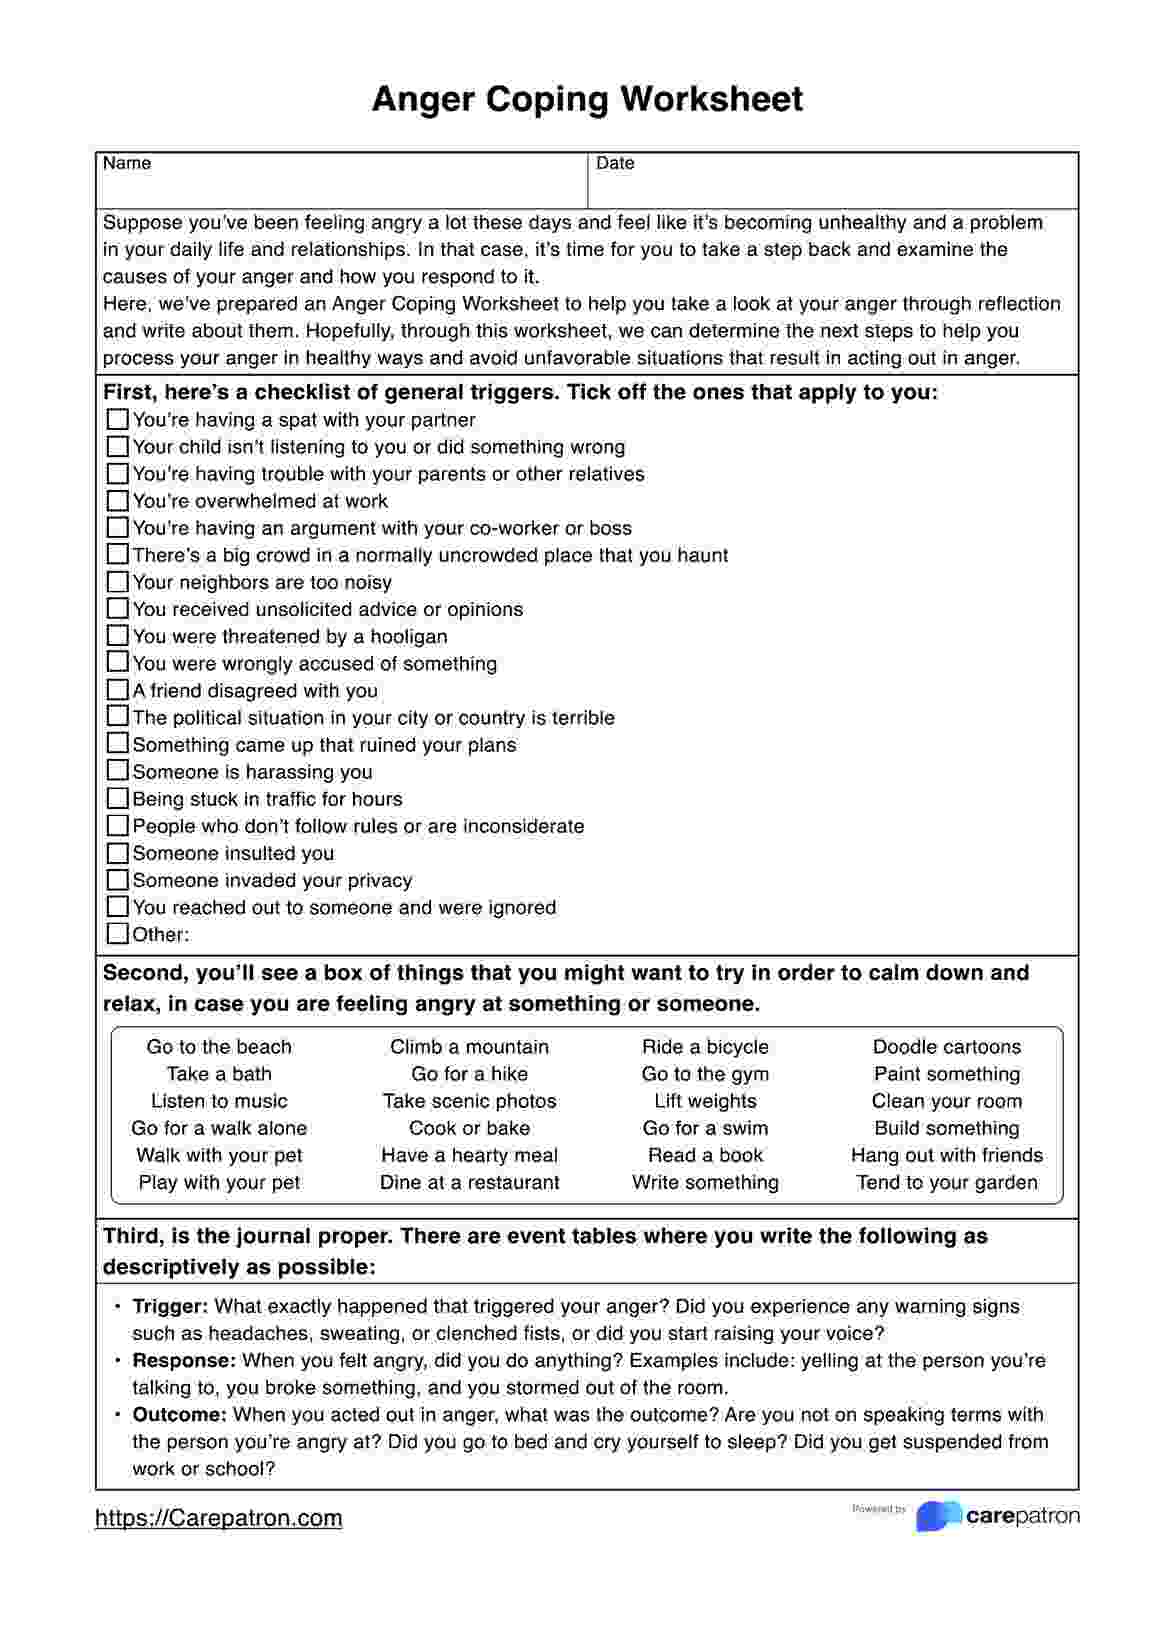 Anger Coping Worksheets PDF Example